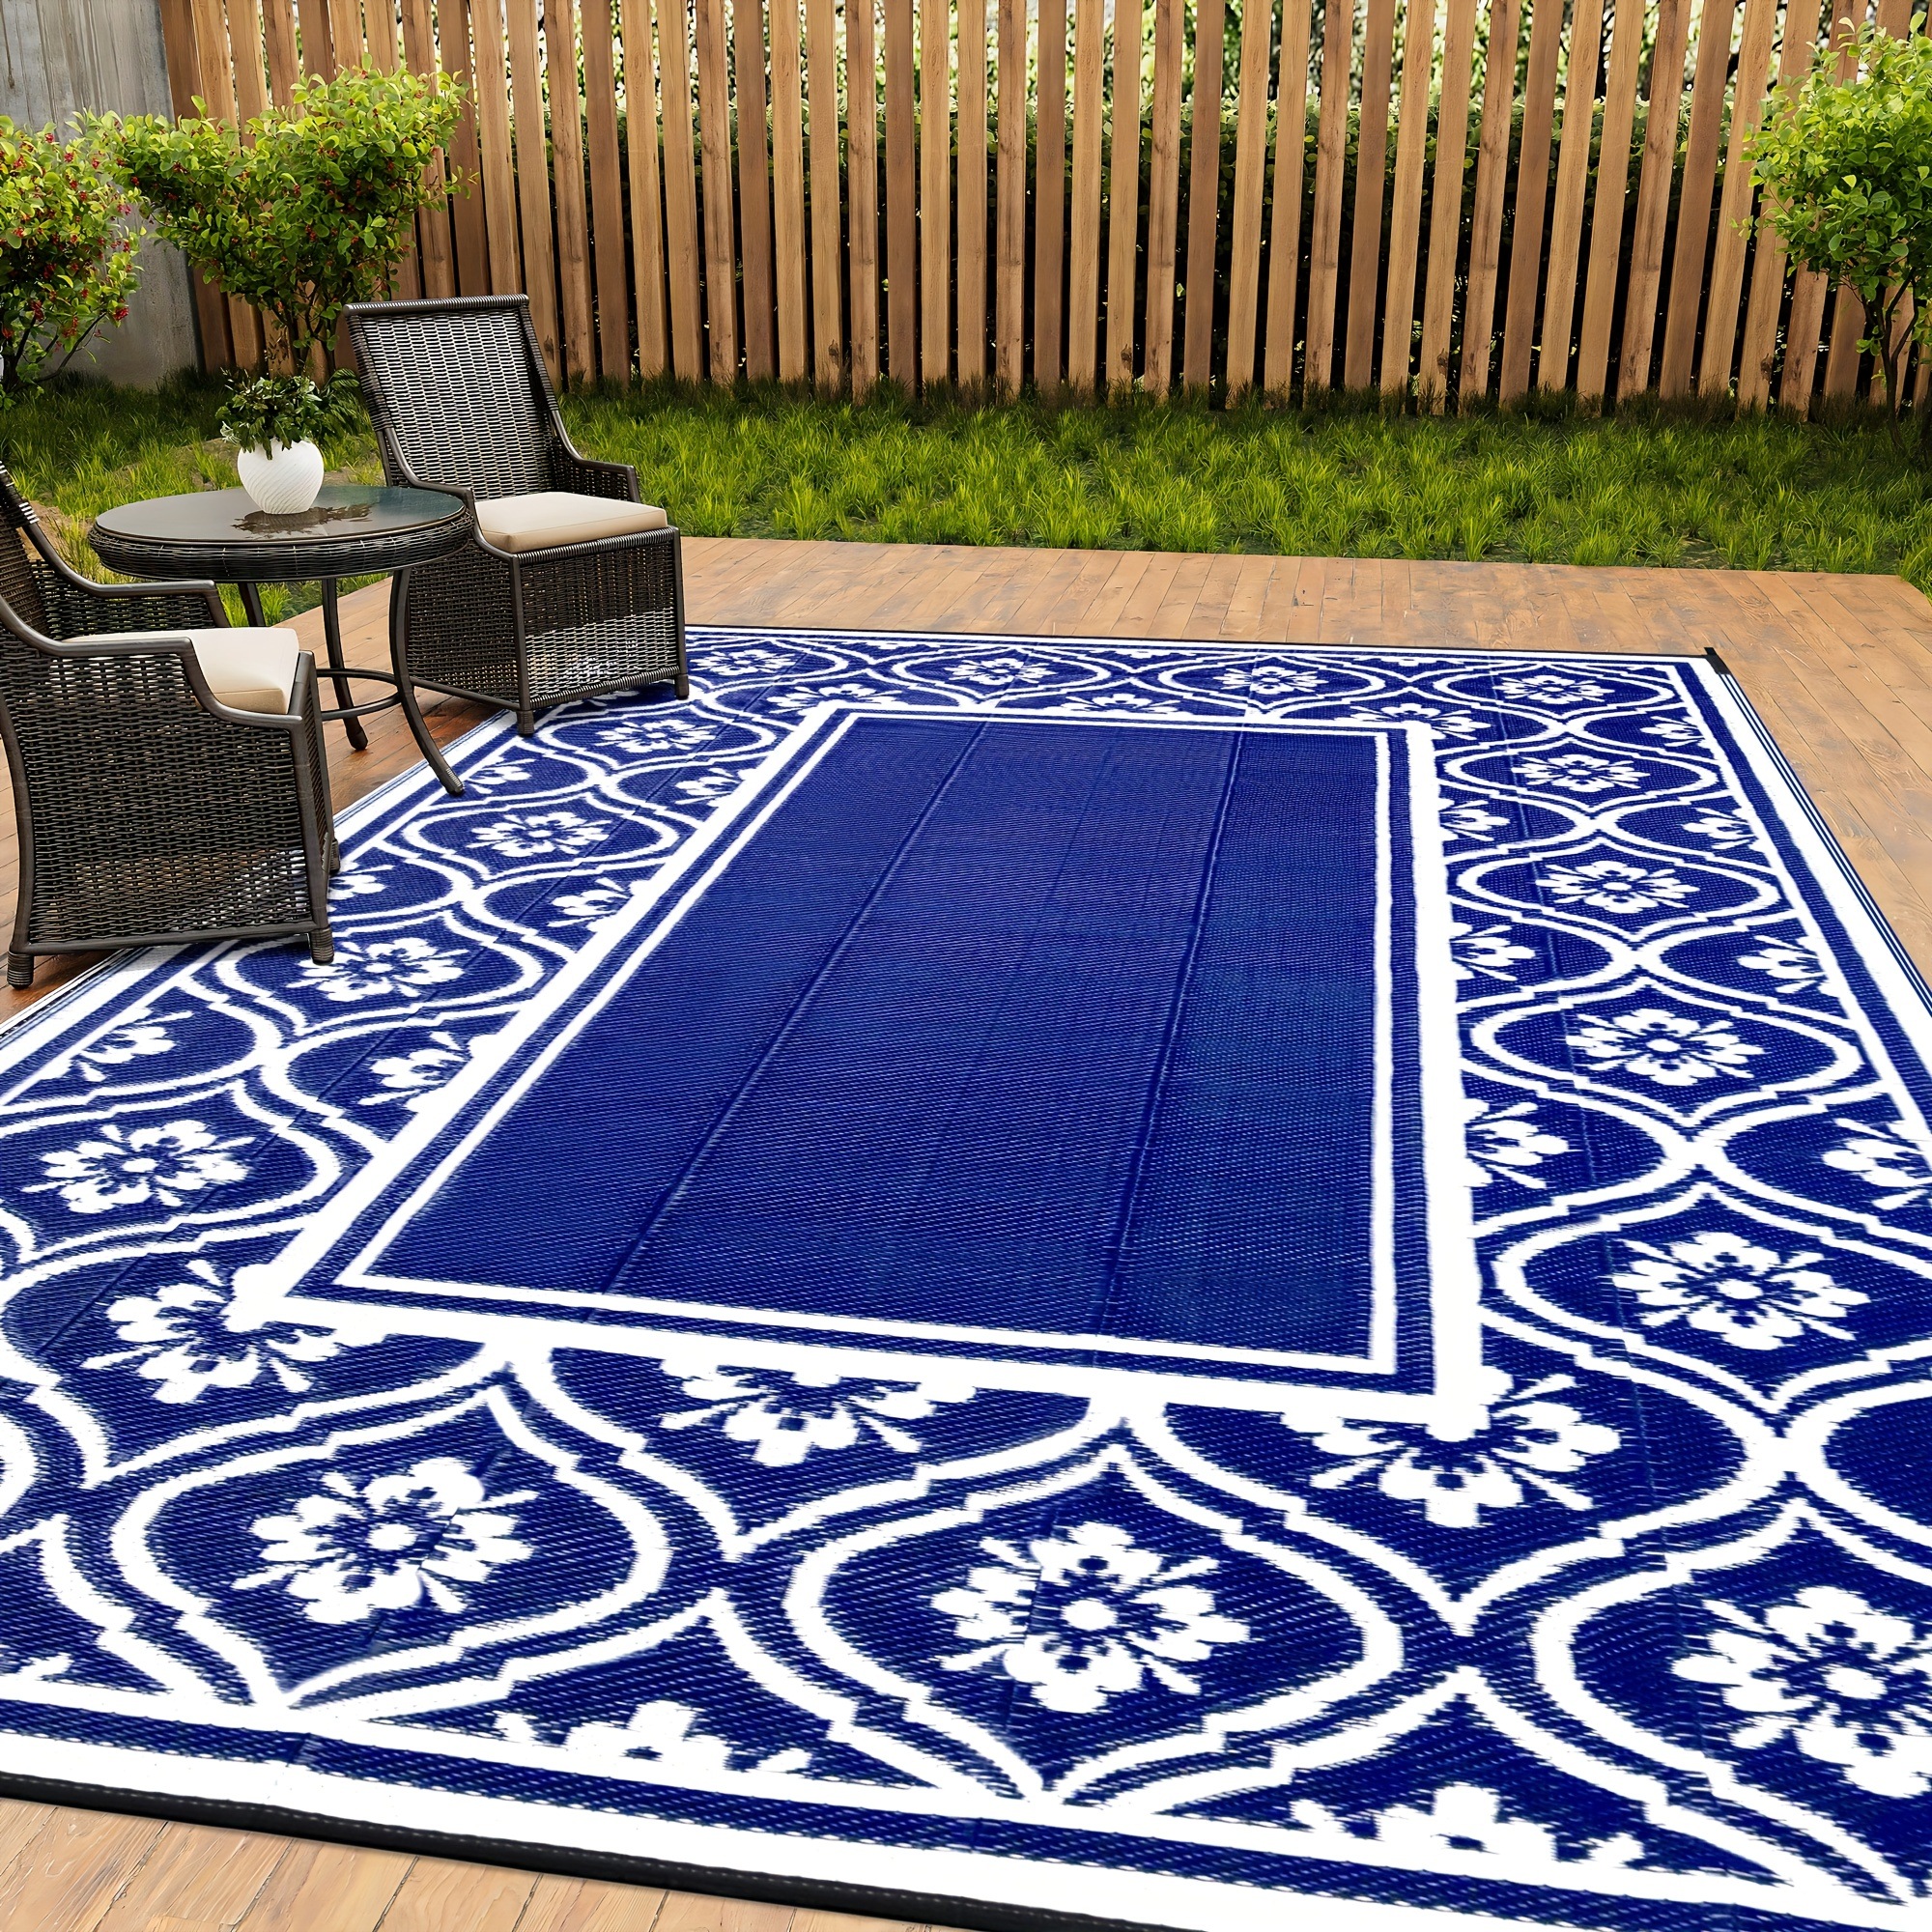 Large Jute Water Resistant Indoor Outdoor Rug 8x10 - Traditional Outdoor  Rugs for Patio, Entryway, Deck, Porch, Camping, RV - Outside Area Rug